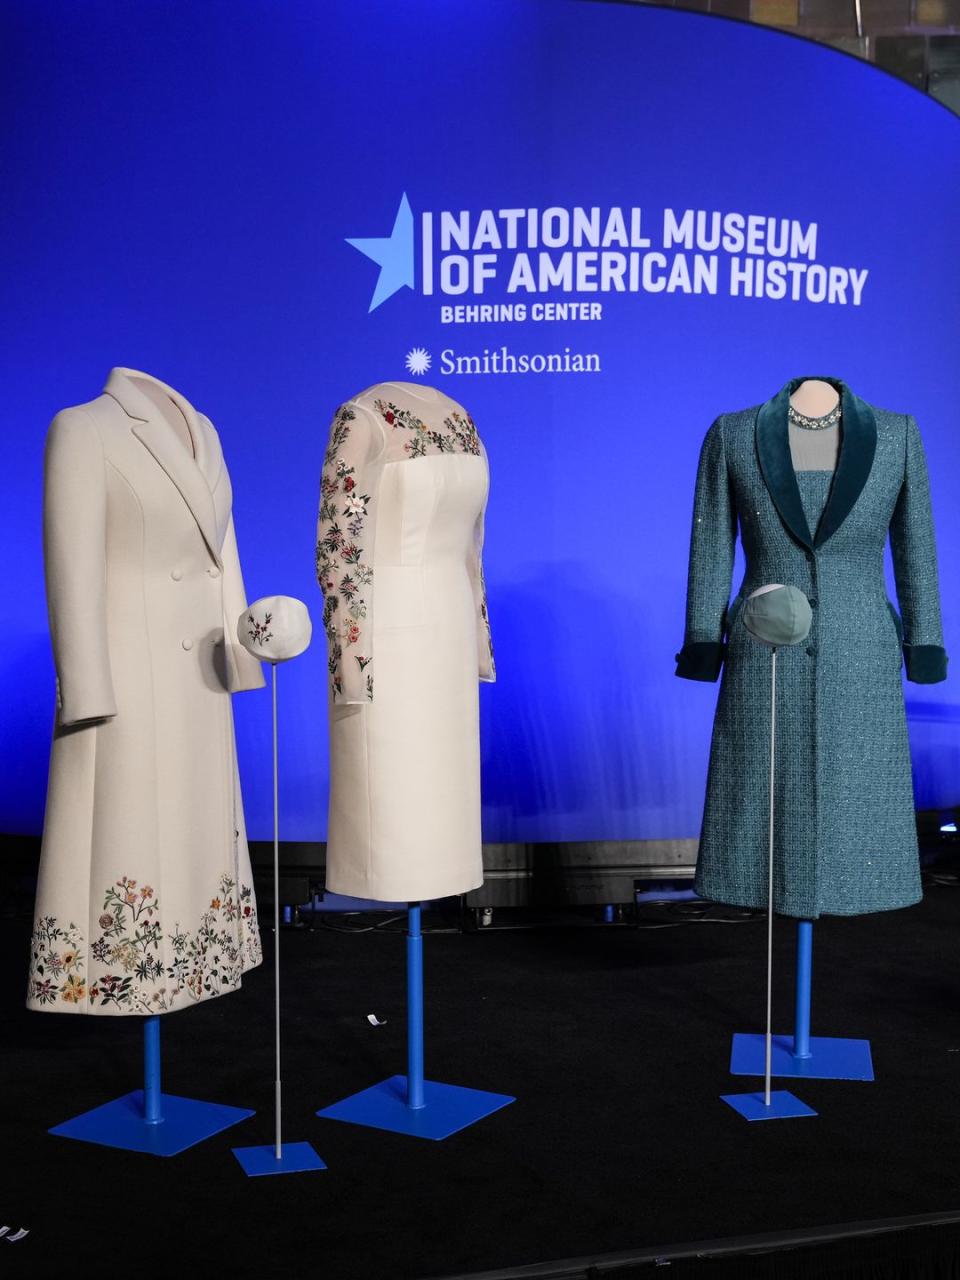 washington, dc january 25 first lady jill biden's inauguration day attire is displayed during an event to present her inauguration day attire to the smithsonian's first ladies collection at the smithsonian national museum of american history on january 25, 2023 in washington, dc presenting the first lady's inauguration attire at the smithsonian is a tradition dating back to helen taft in 1912 photo by drew angerergetty images